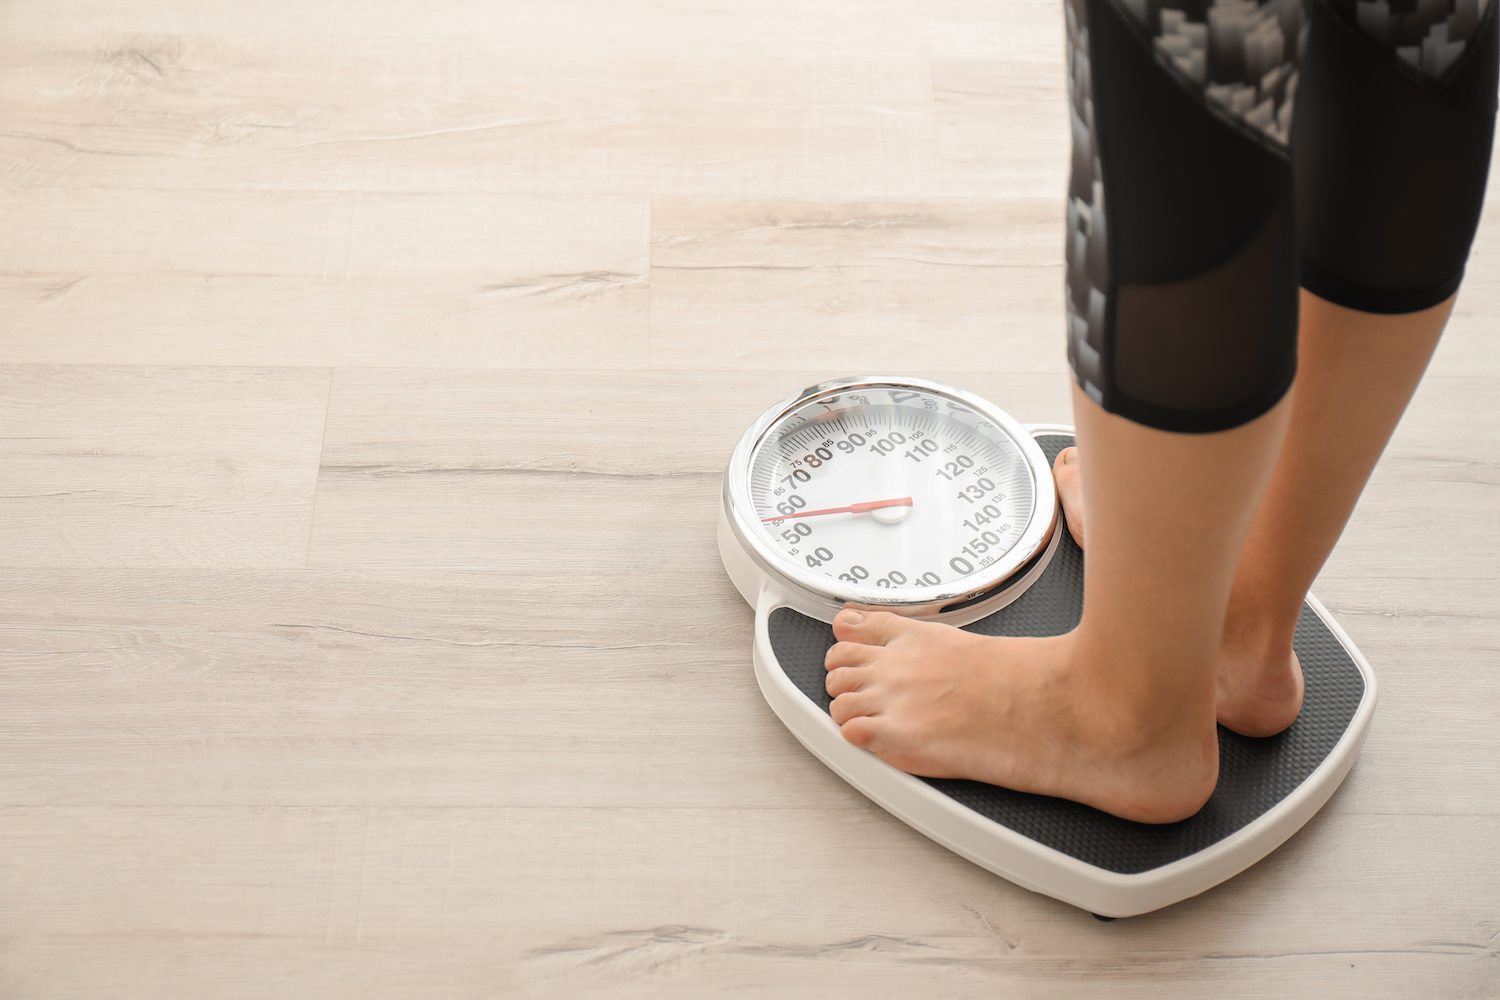 Two feet appear on a scale as a person checks weight